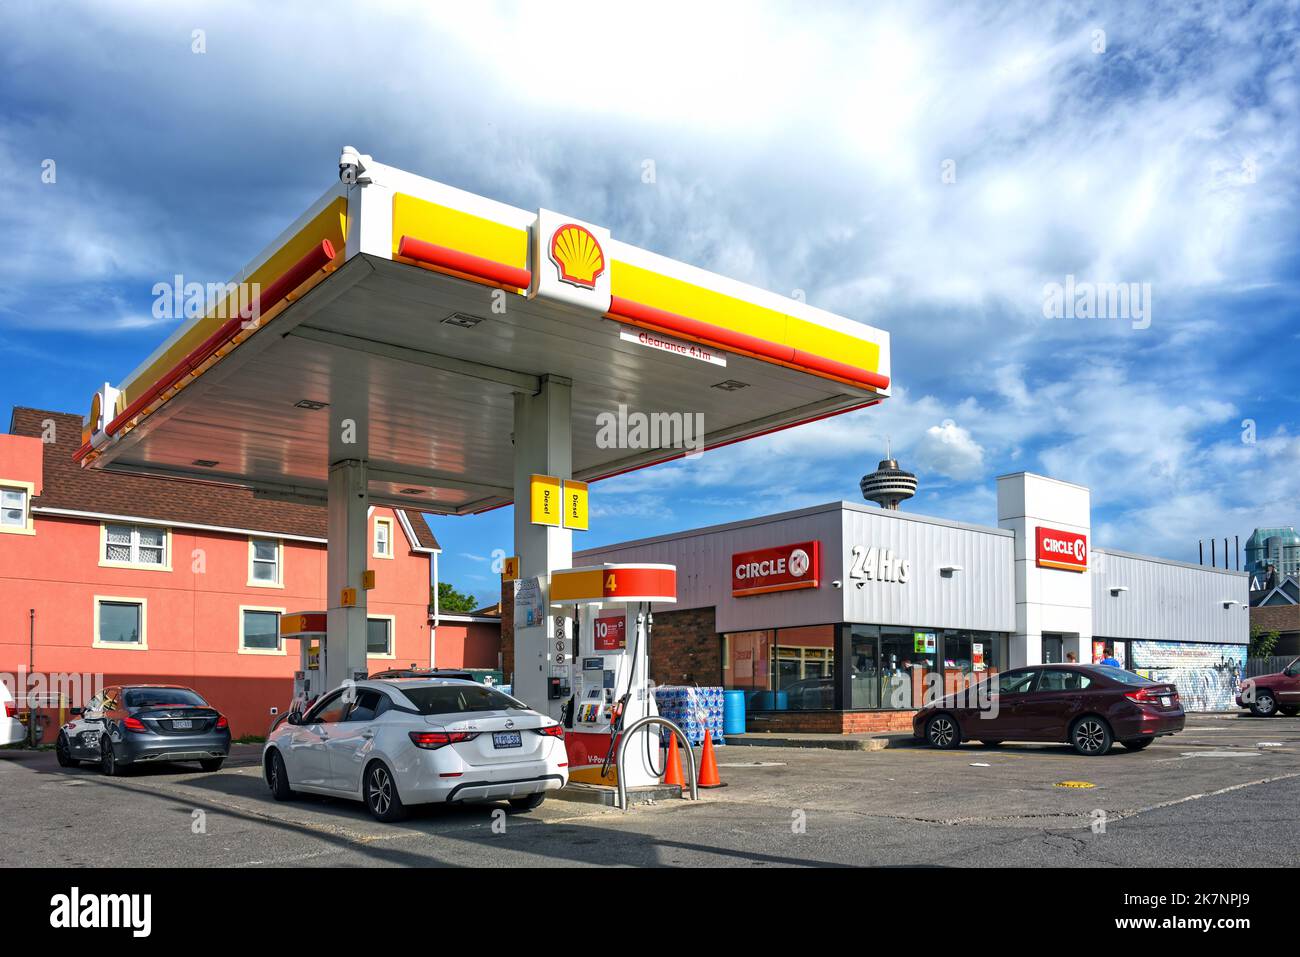 Niagara Falls, Canada - August 13, 2022: Shell gas station and Circle K convenience store on Ferry Street, an area with a heavy tourist presence, on a Stock Photo